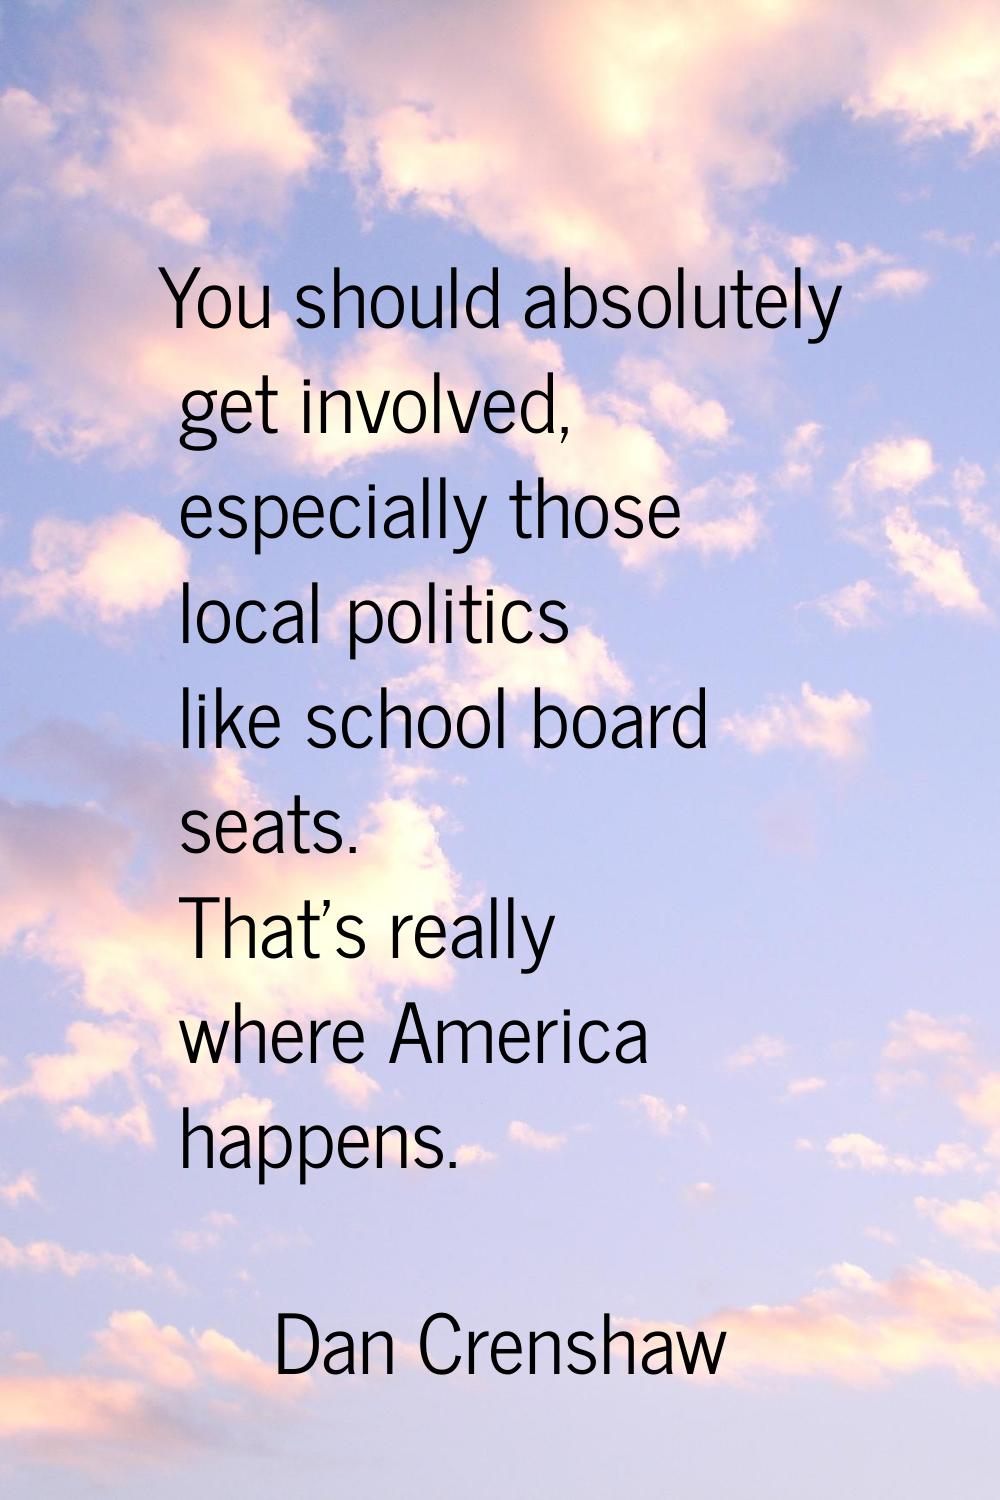 You should absolutely get involved, especially those local politics like school board seats. That's